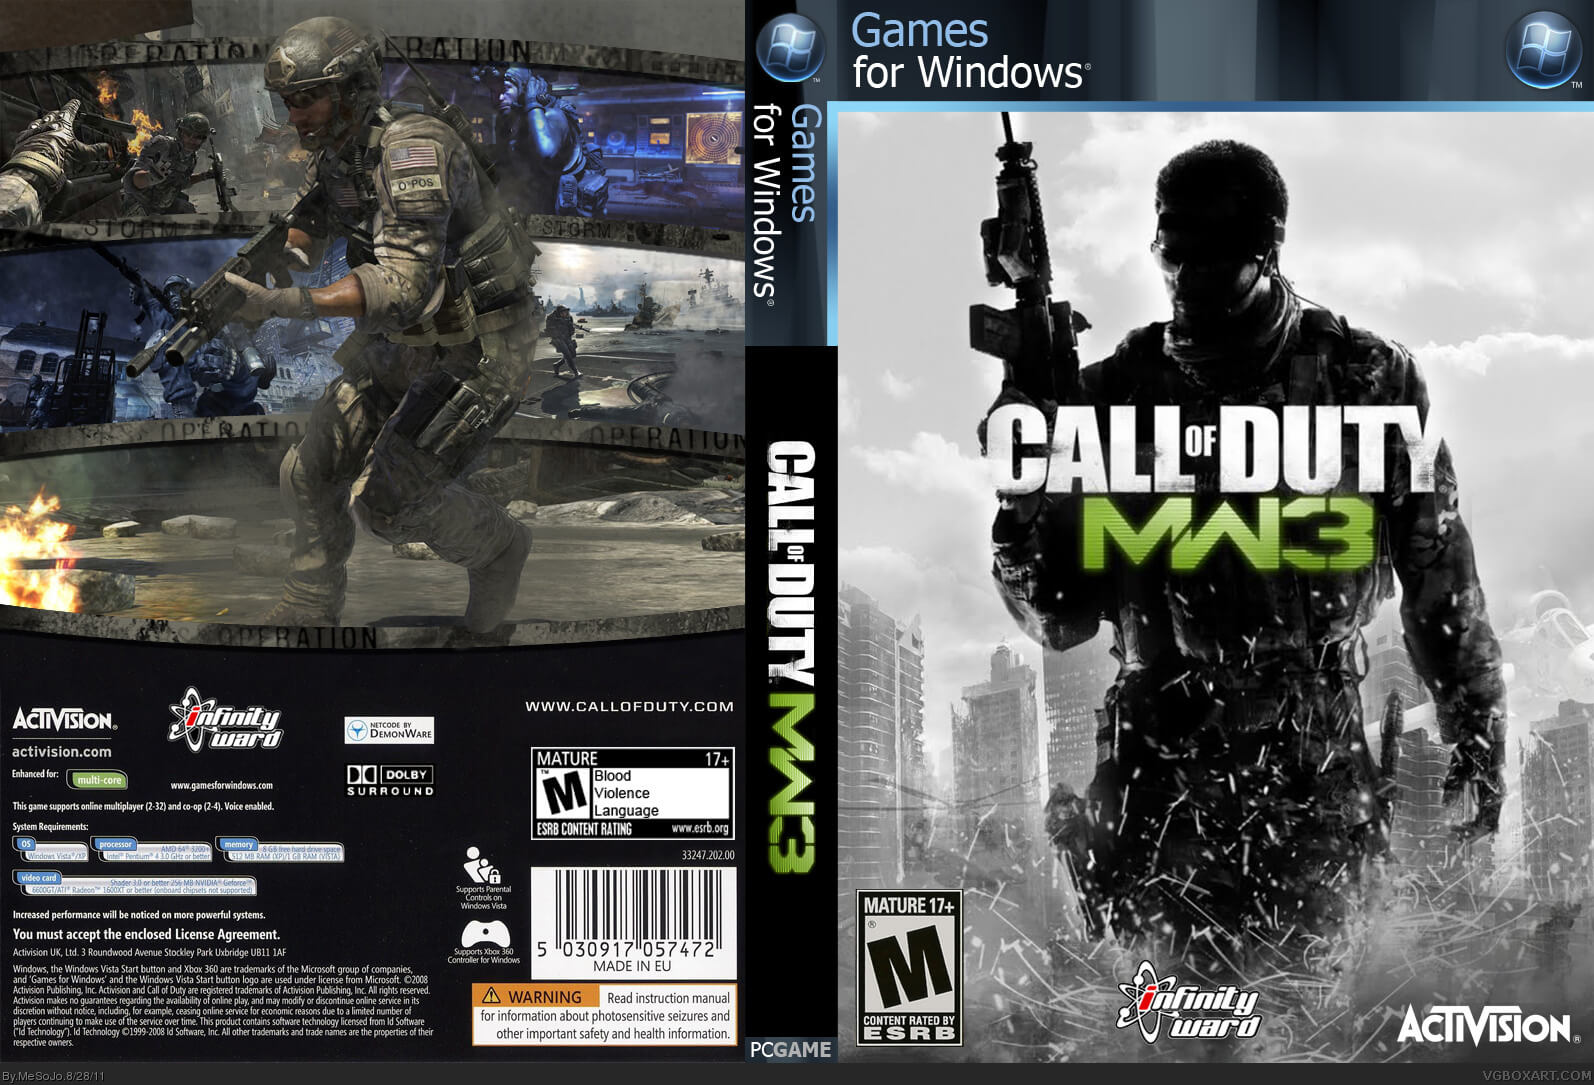 Call Of Duty Modern Warfare 3 PC Game Download Free Full Version